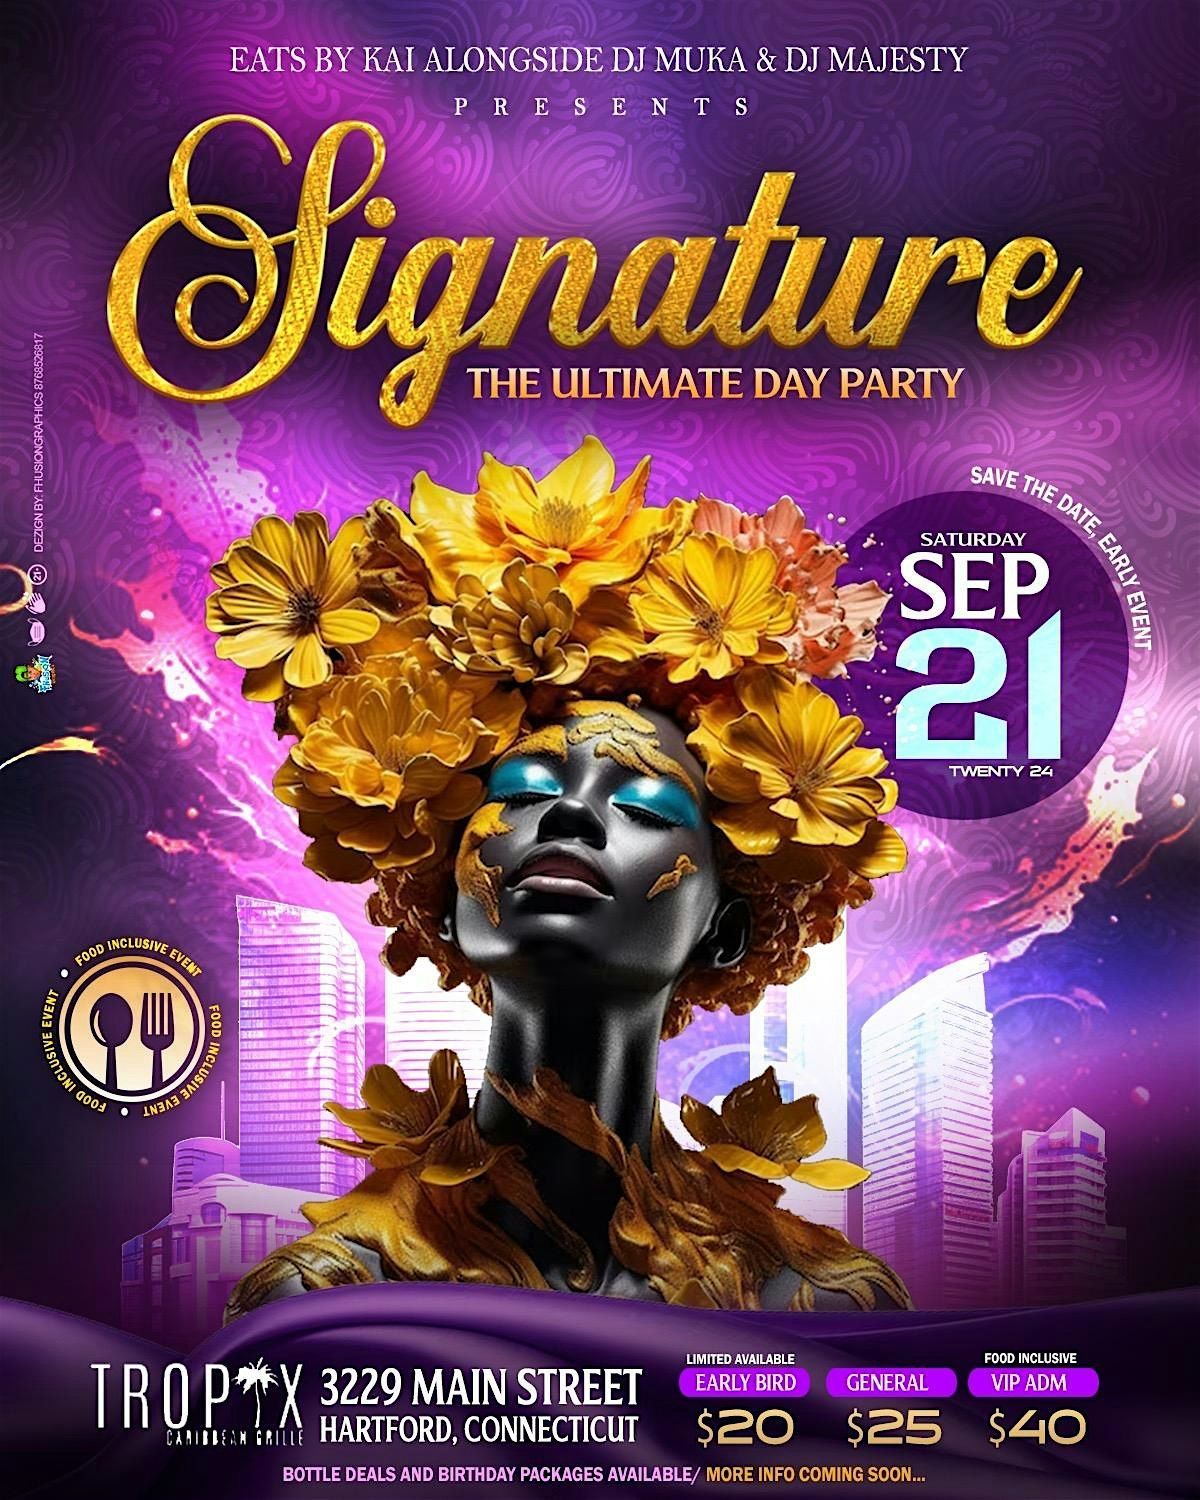 "Signature" The Ultimate Day Party